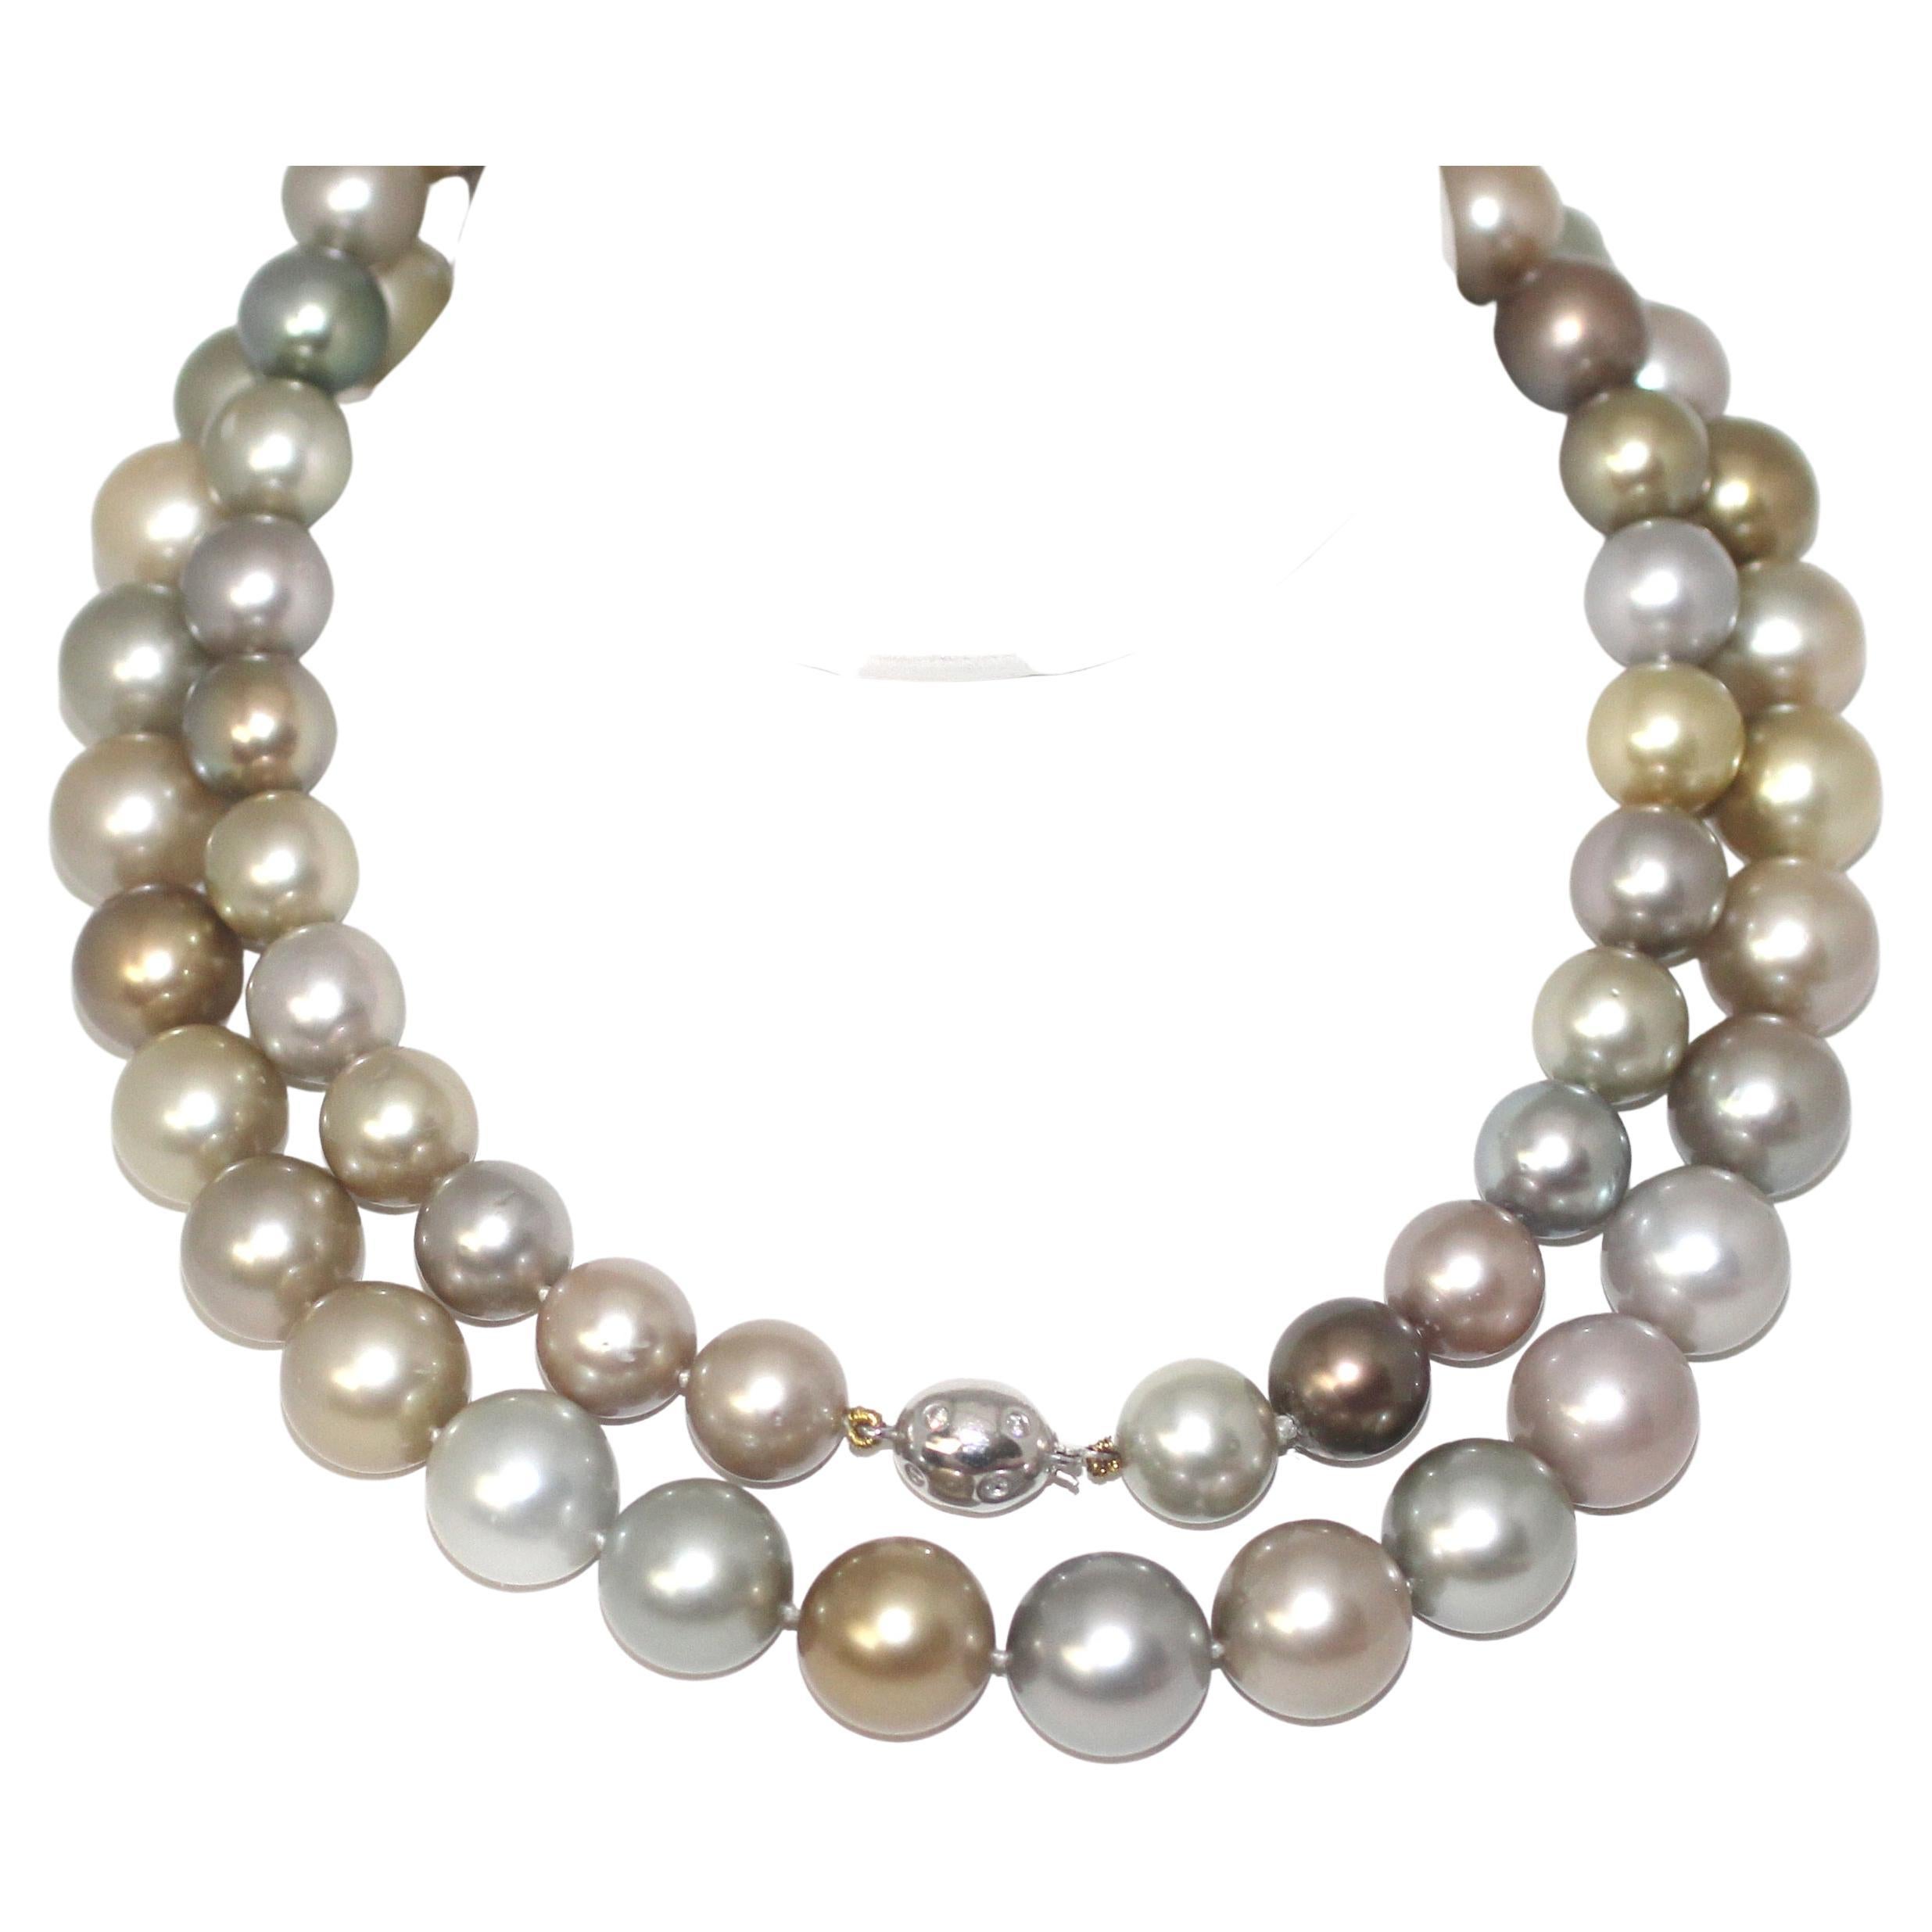 Hakimoto 15x12 mm 33.5" Natural Fancy Color South Sea Pearl Necklace